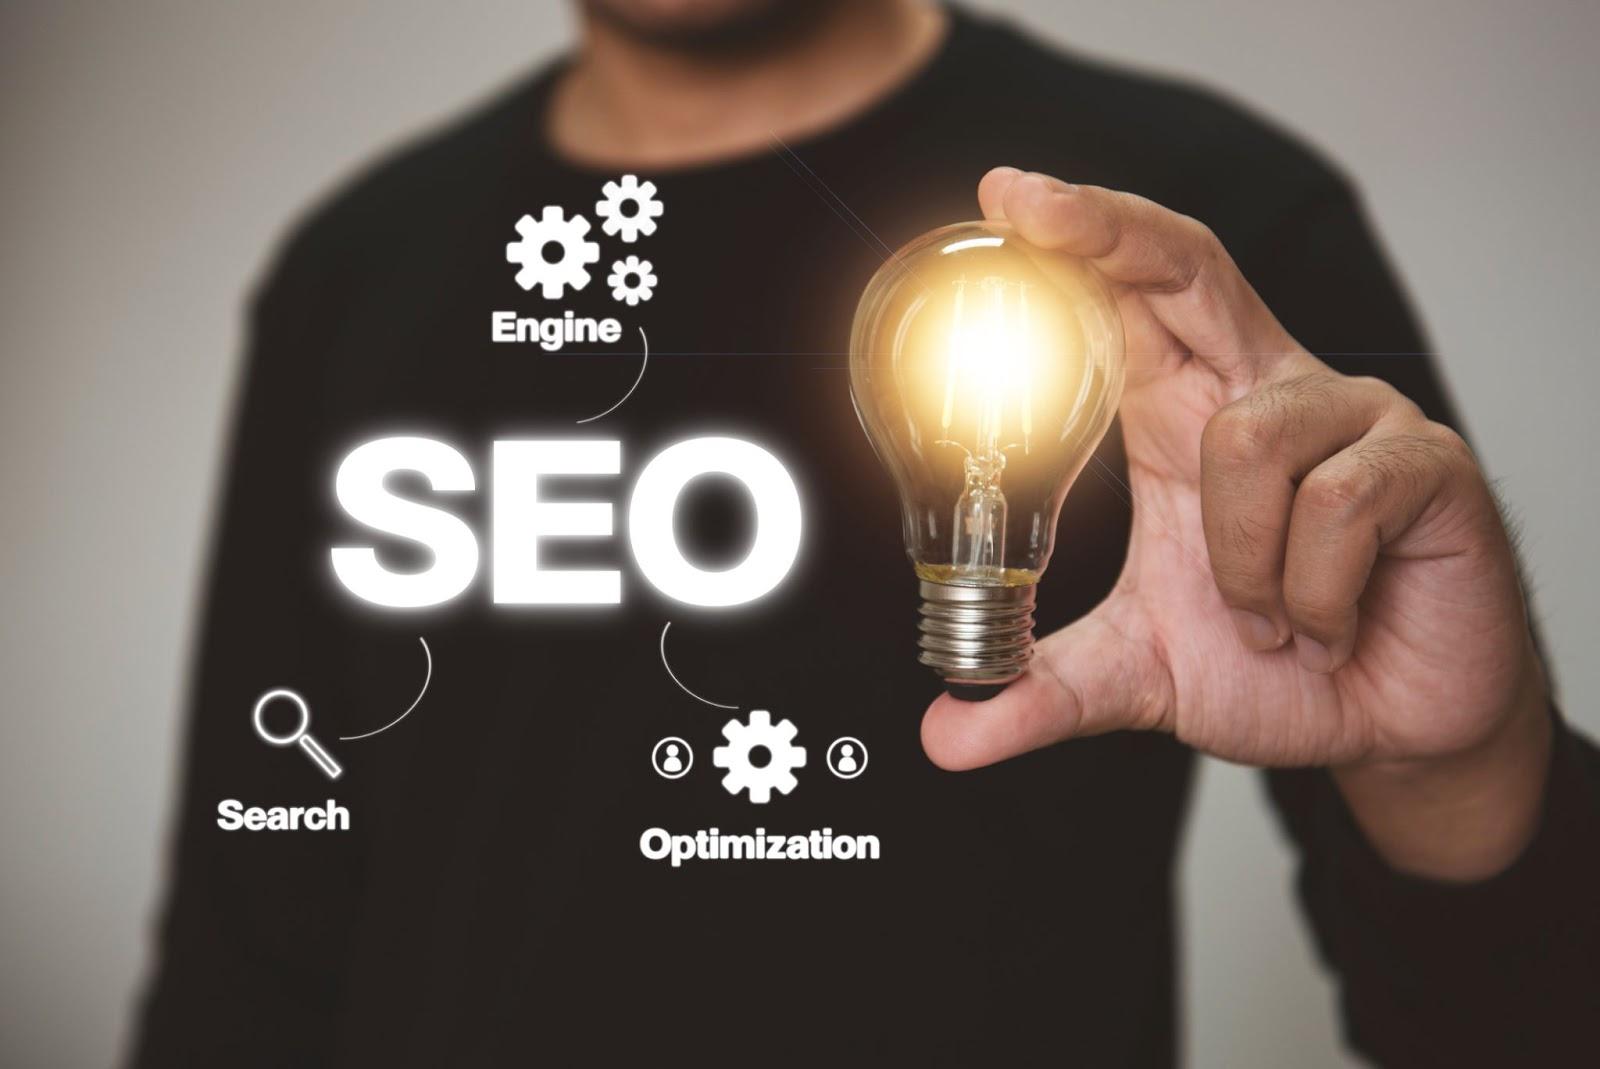 SEO has changed the Internet forever – but the SEO process is more complicated than it seems.